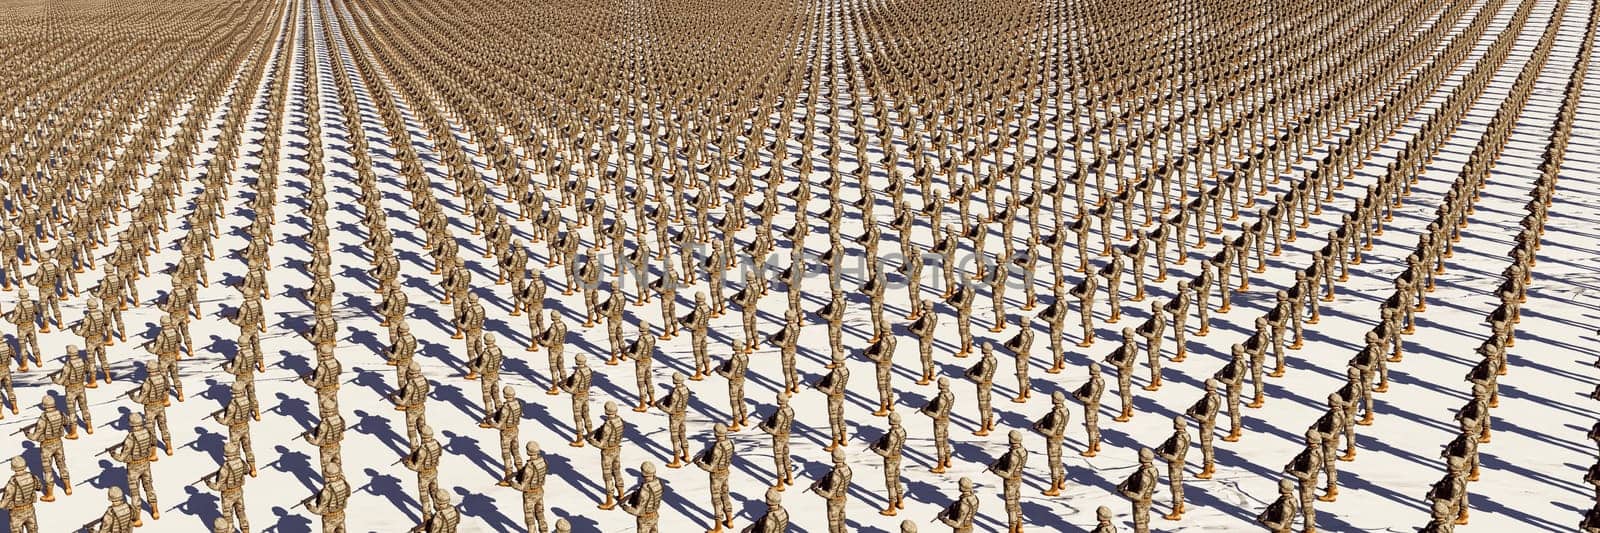 A seemingly infinite array of virtual soldiers in desert camouflage attire marching on a stark white ground.